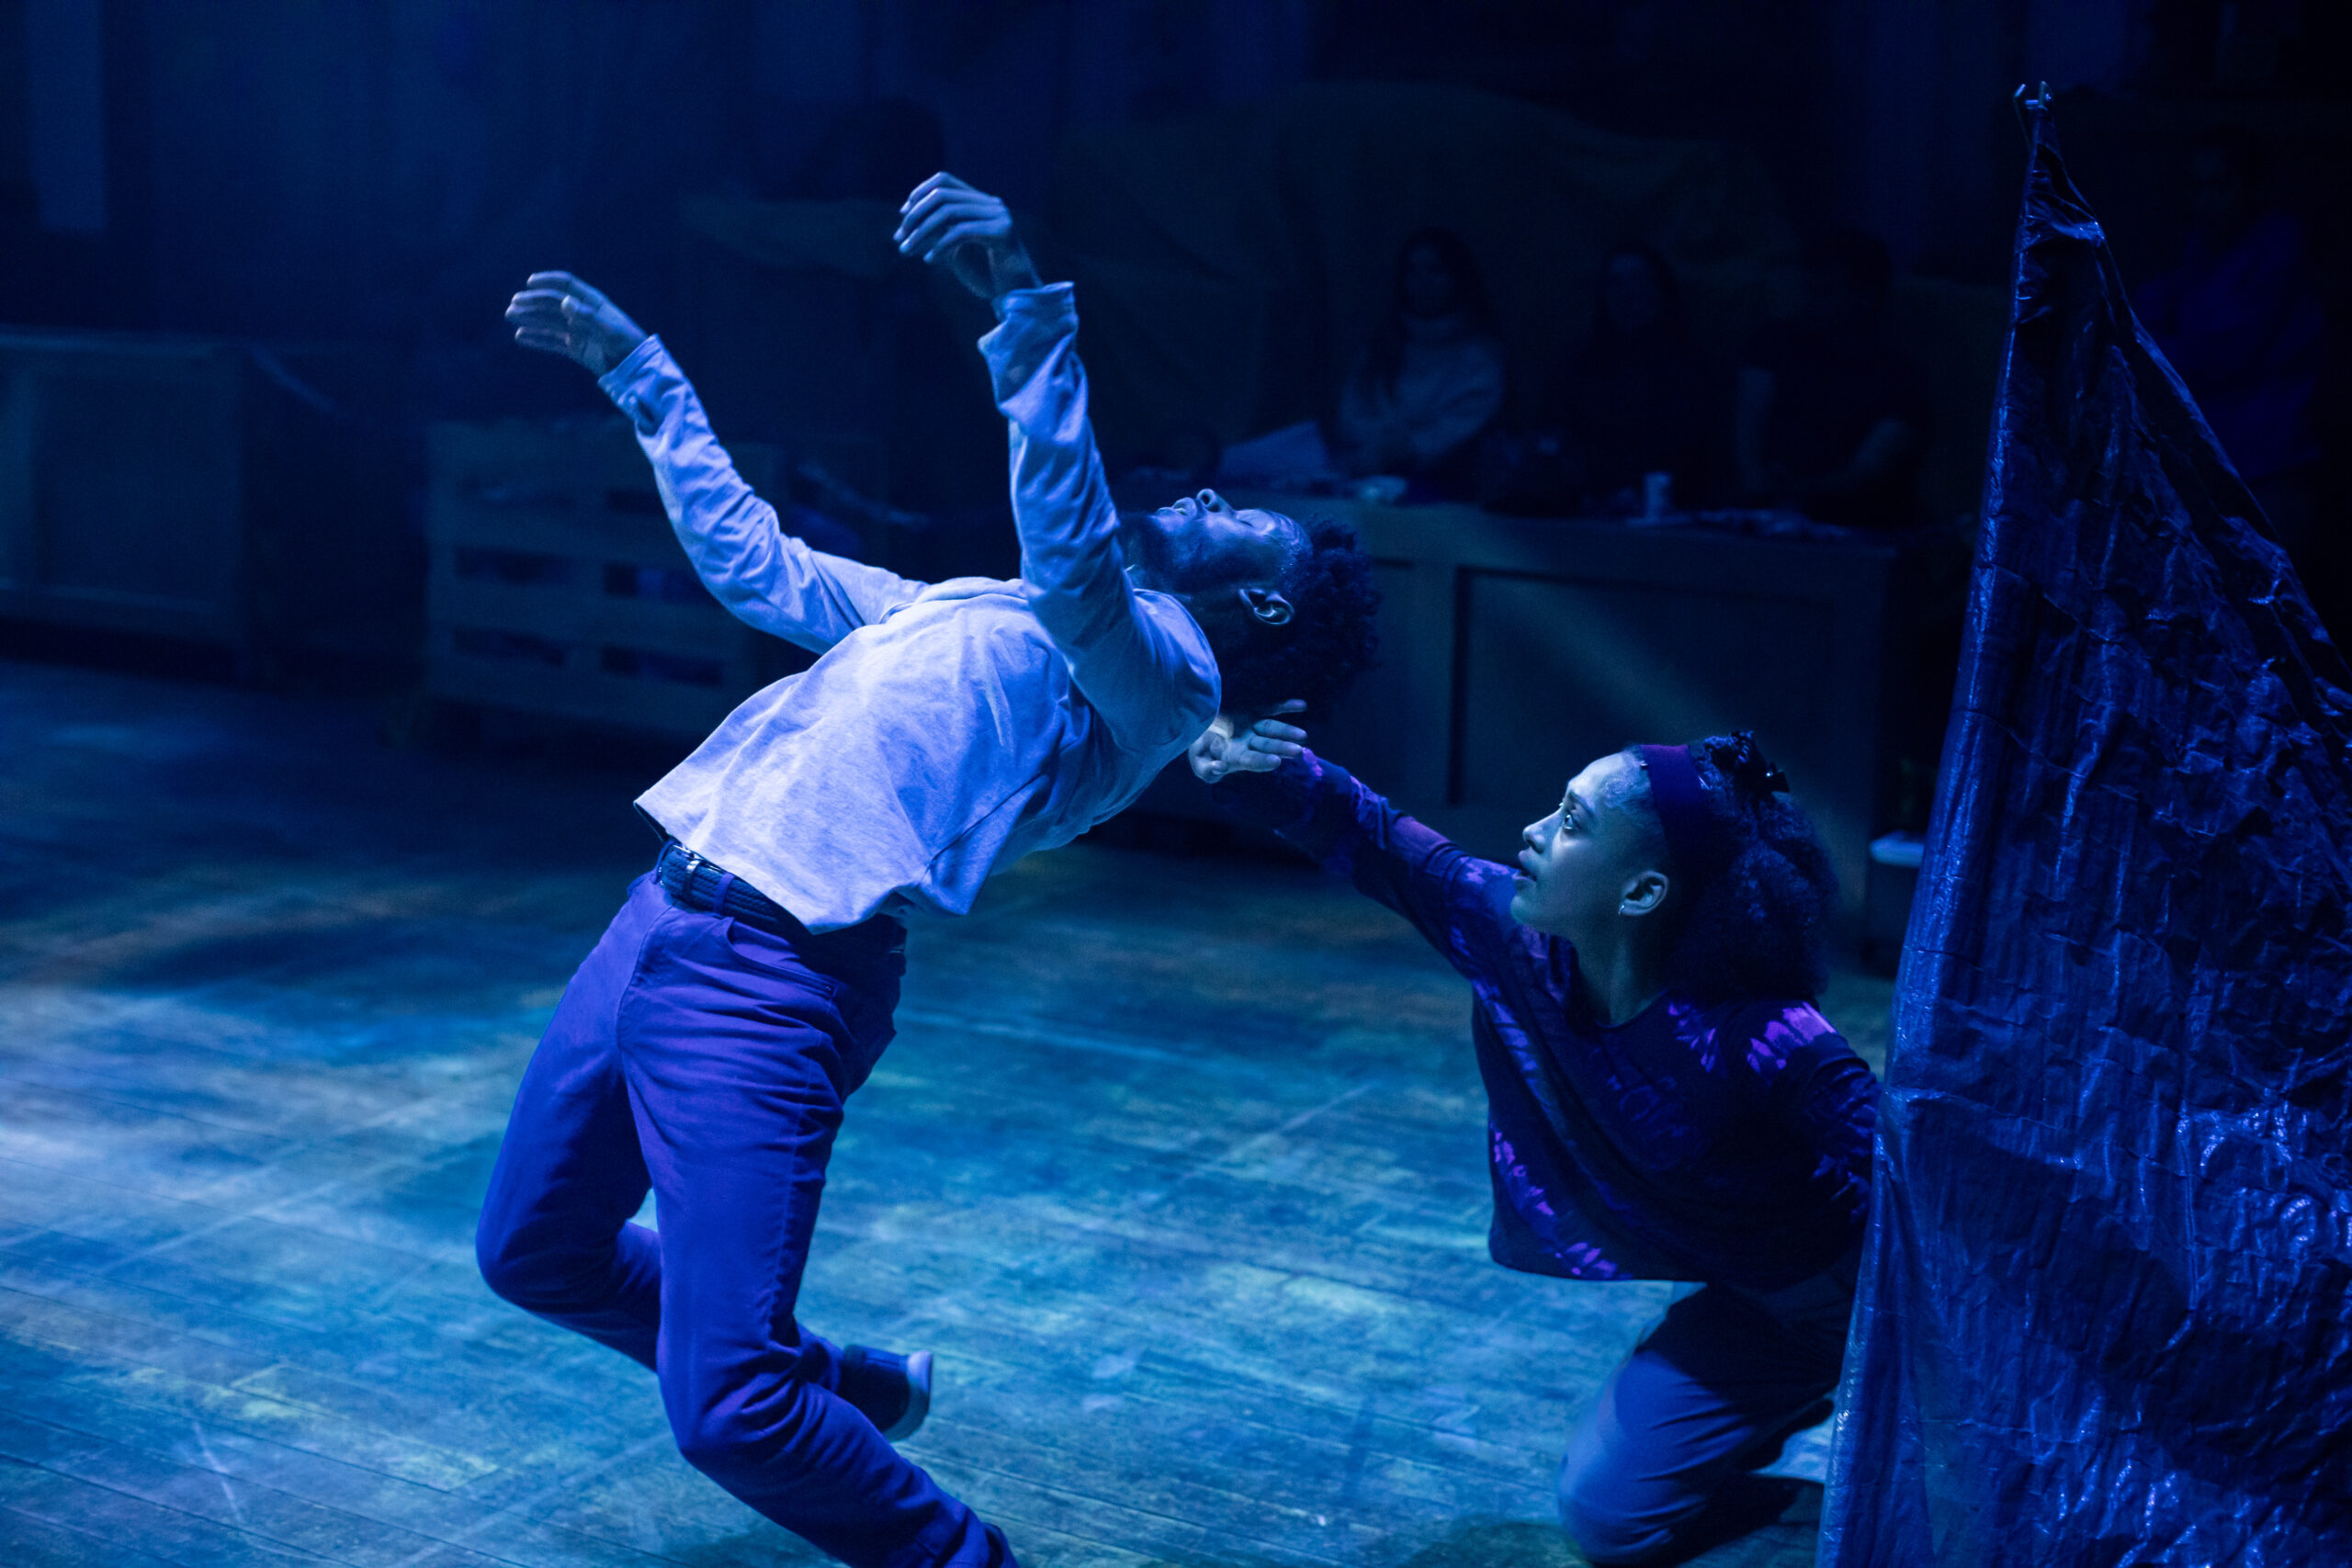 A dancer bends backwards bathed in blue light. His arms are outstretched, and behind him another dancer, kneeling on the ground is holding his head